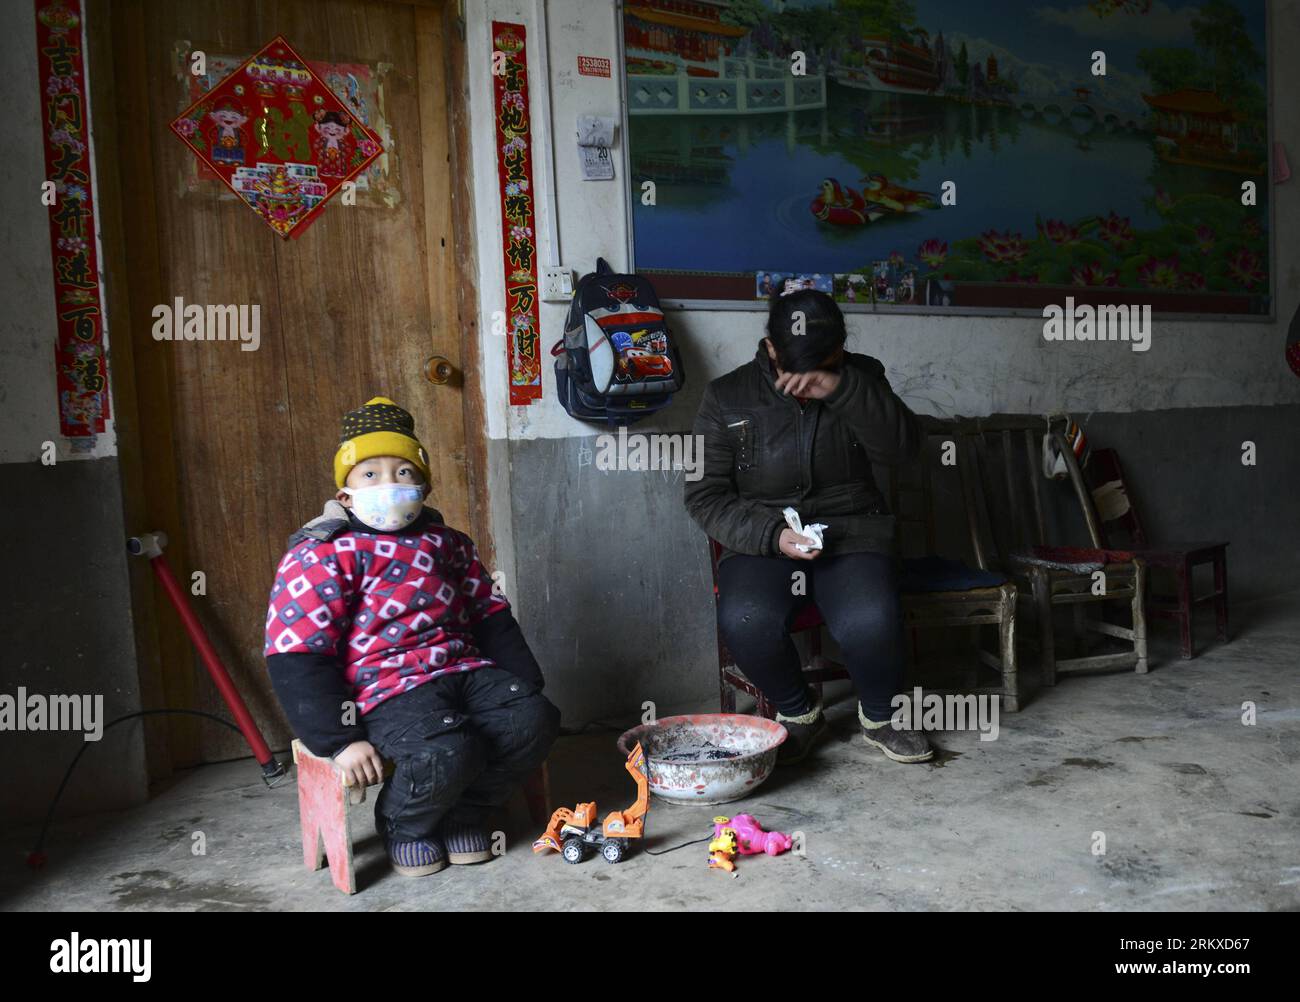 Bildnummer: 58948572  Datum: 19.12.2012  Copyright: imago/Xinhua A mother and her child Xie Hao, who is suffering from leukemia, are seen at home in Zhugan Township of Luoshan County, central China s Henan Province, Dec. 20, 2012. Xie was diagnosed with leukemia in 2011, and has spent over 100,000 yuan (16,050 U.S. dollars) for medical treatment. (Xinhua/Jin Liangkuai) (ry) CHINA-HENAN-LEUKEMIA-CHILDREN (CN) PUBLICATIONxNOTxINxCHN Gesellschaft krank Krankheit Leukämie Armut Kind x0x xrj 2012 quer     58948572 Date 19 12 2012 Copyright Imago XINHUA a Mother and her Child Xie Hao Who IS Sufferin Stock Photo